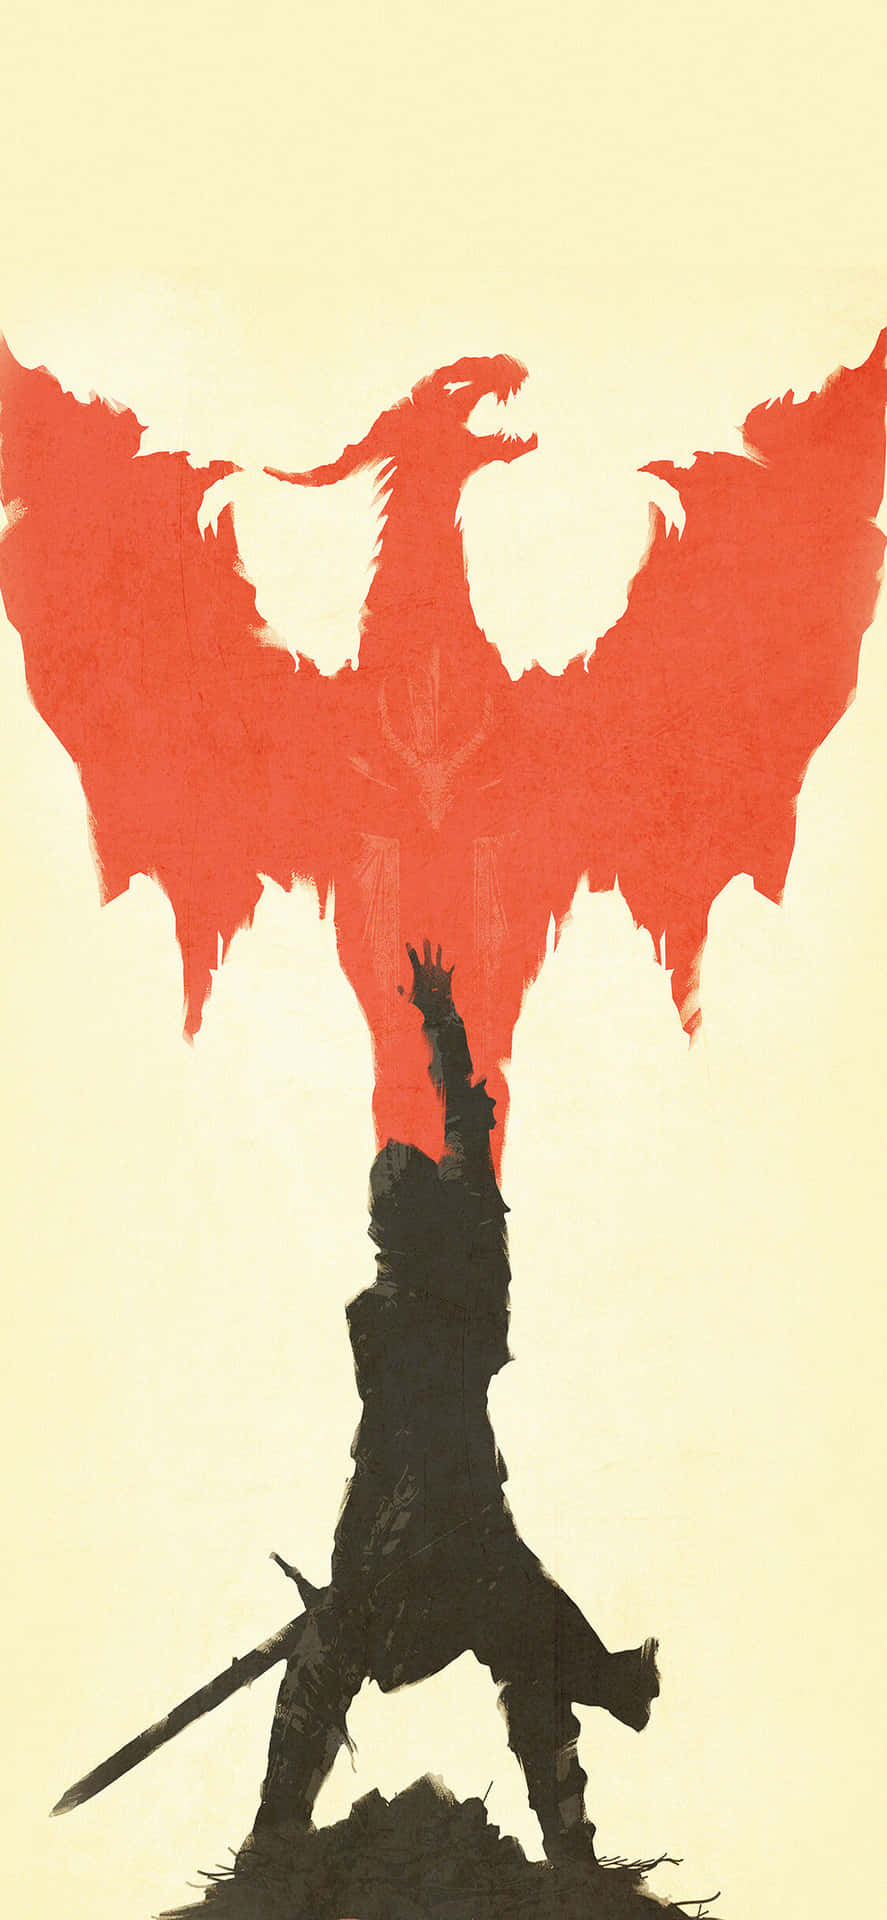 dragon age inquisition iphone wallpaper